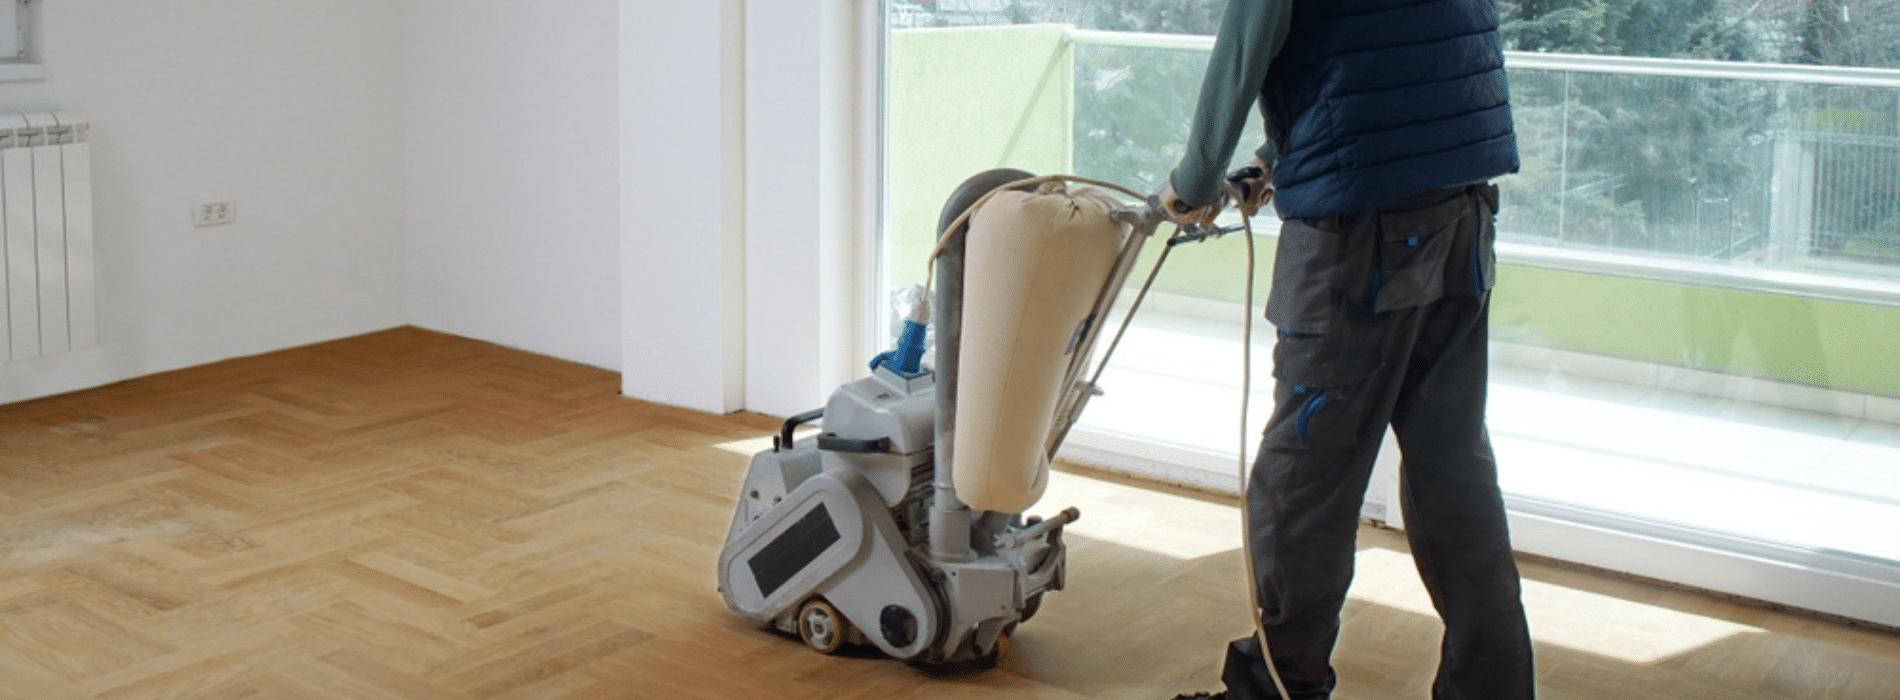 In Park Royal, NW10, Expert herringbone floor sanding by Mr Sander® using the powerful Effect 2200 sander (220V, 50/60Hz). Witness the precision and efficiency of our process, with the HEPA-filtered dust extraction system ensuring a clean and flawless finish.